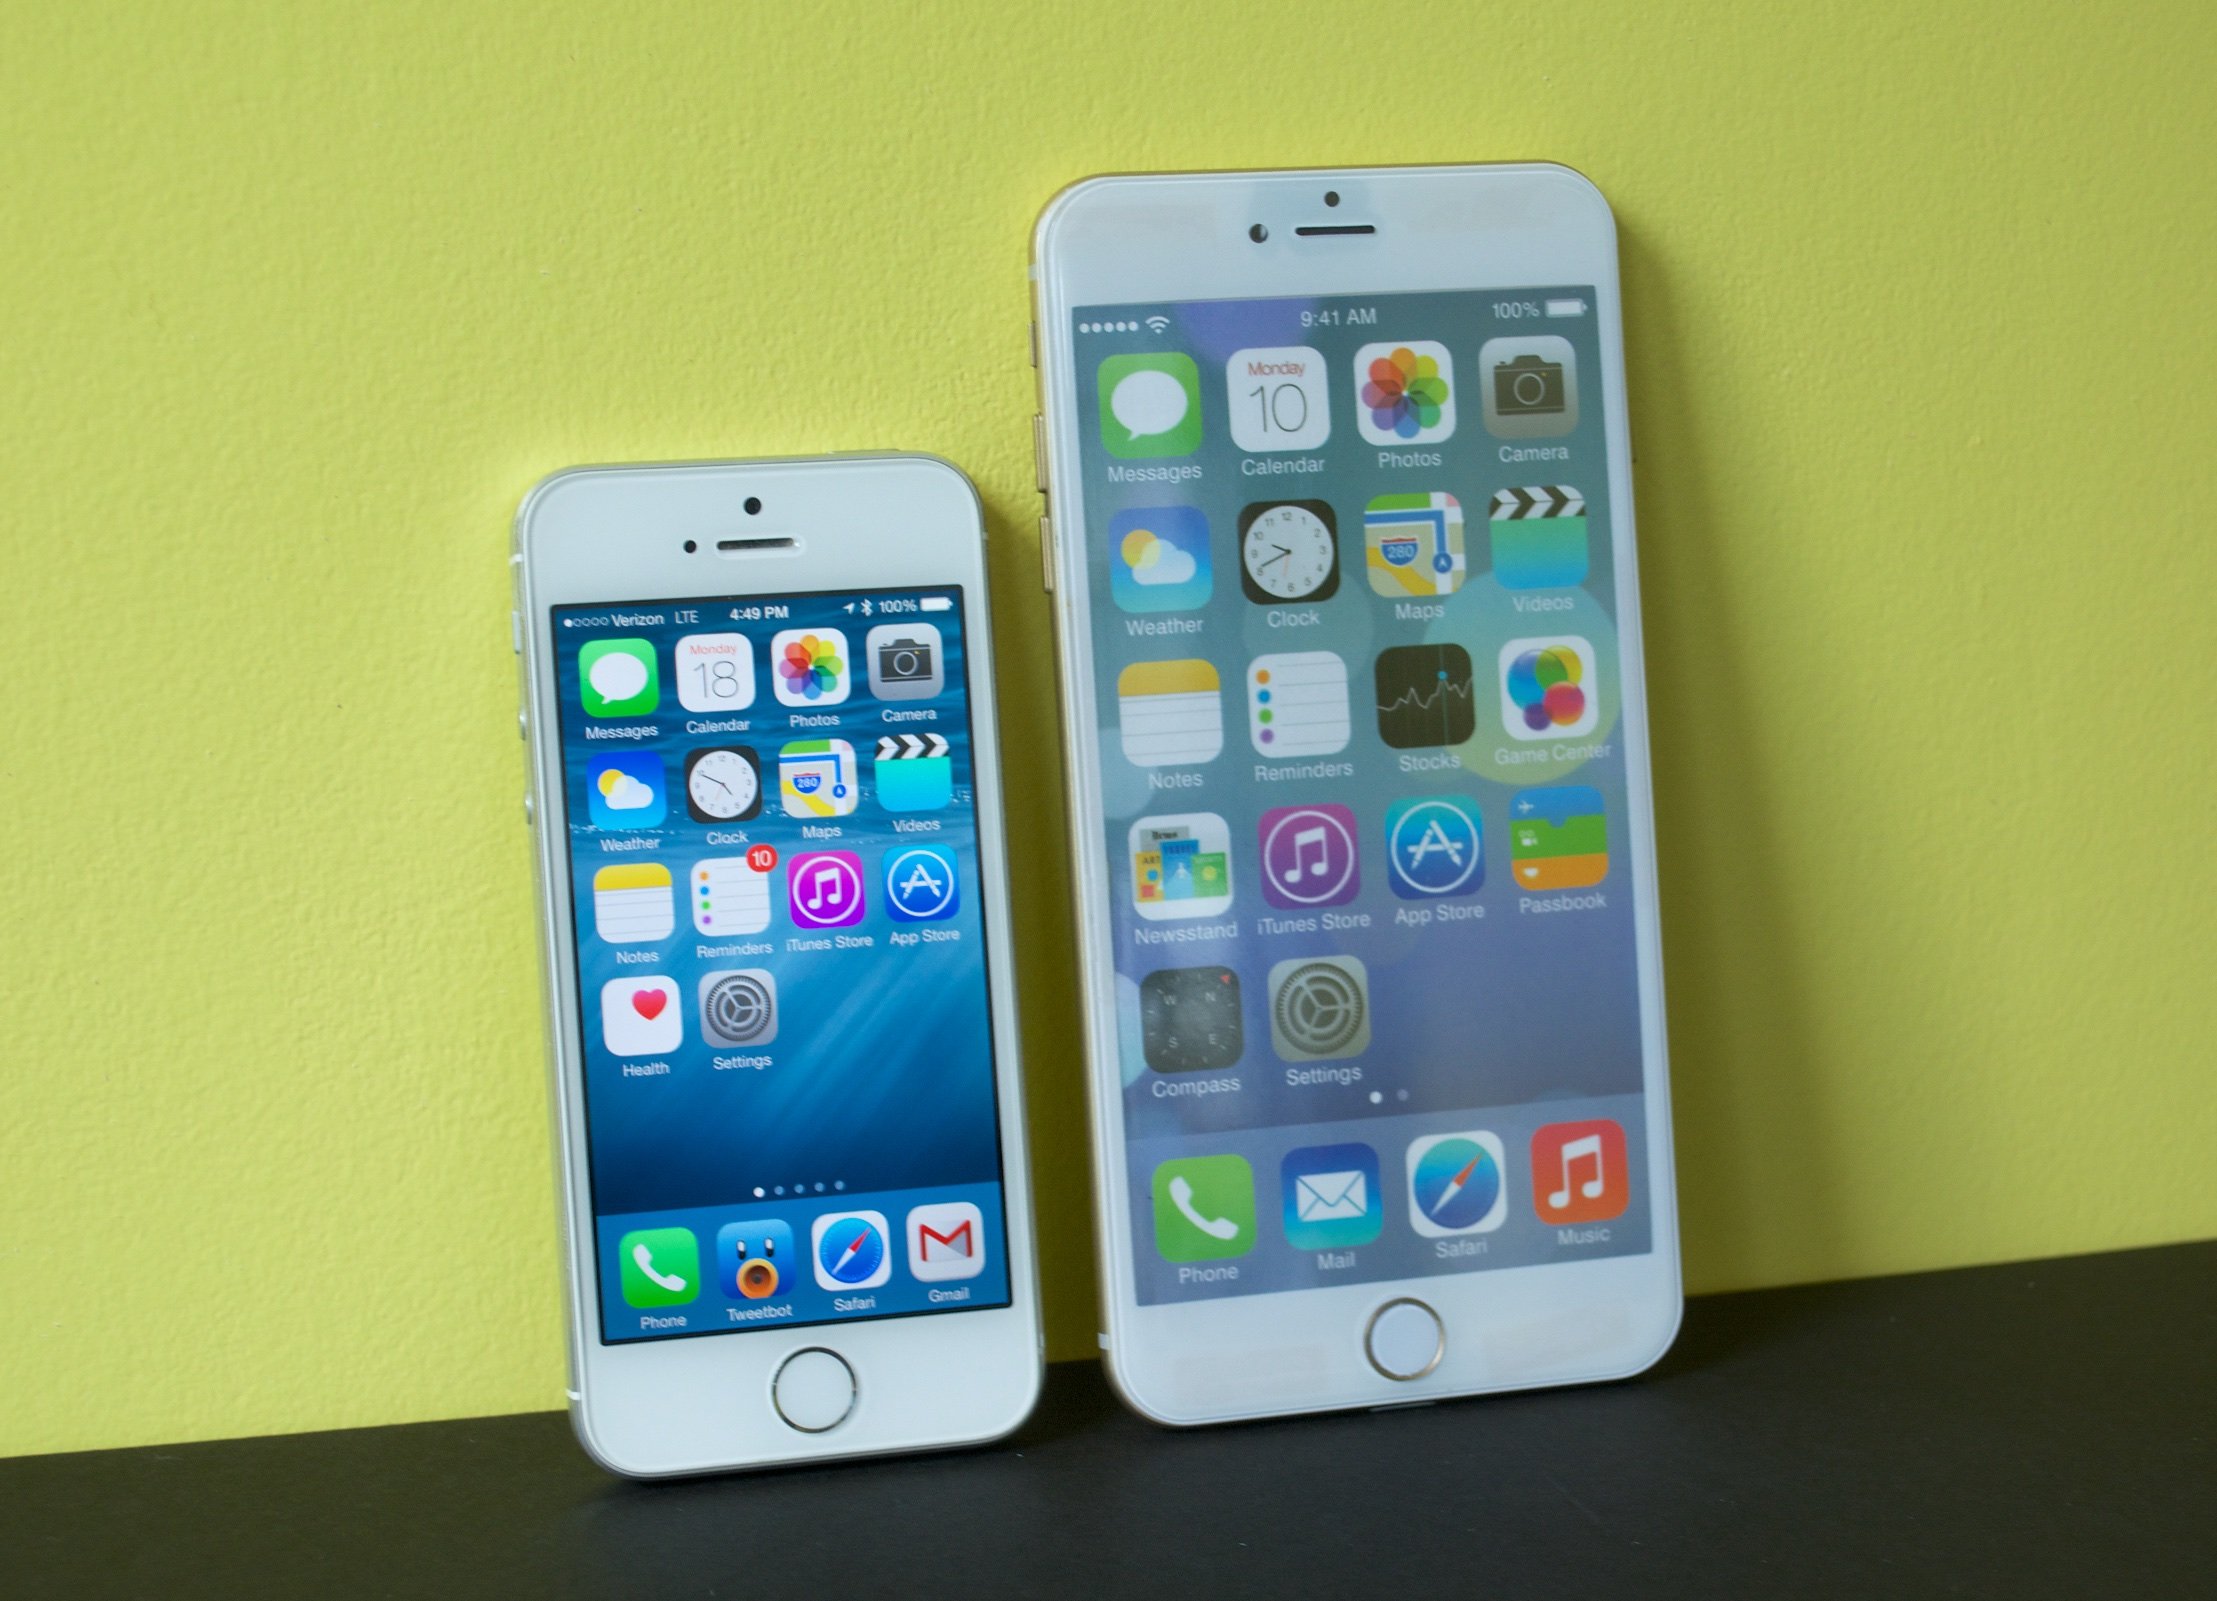 iphone 6 size compared to iphone 5